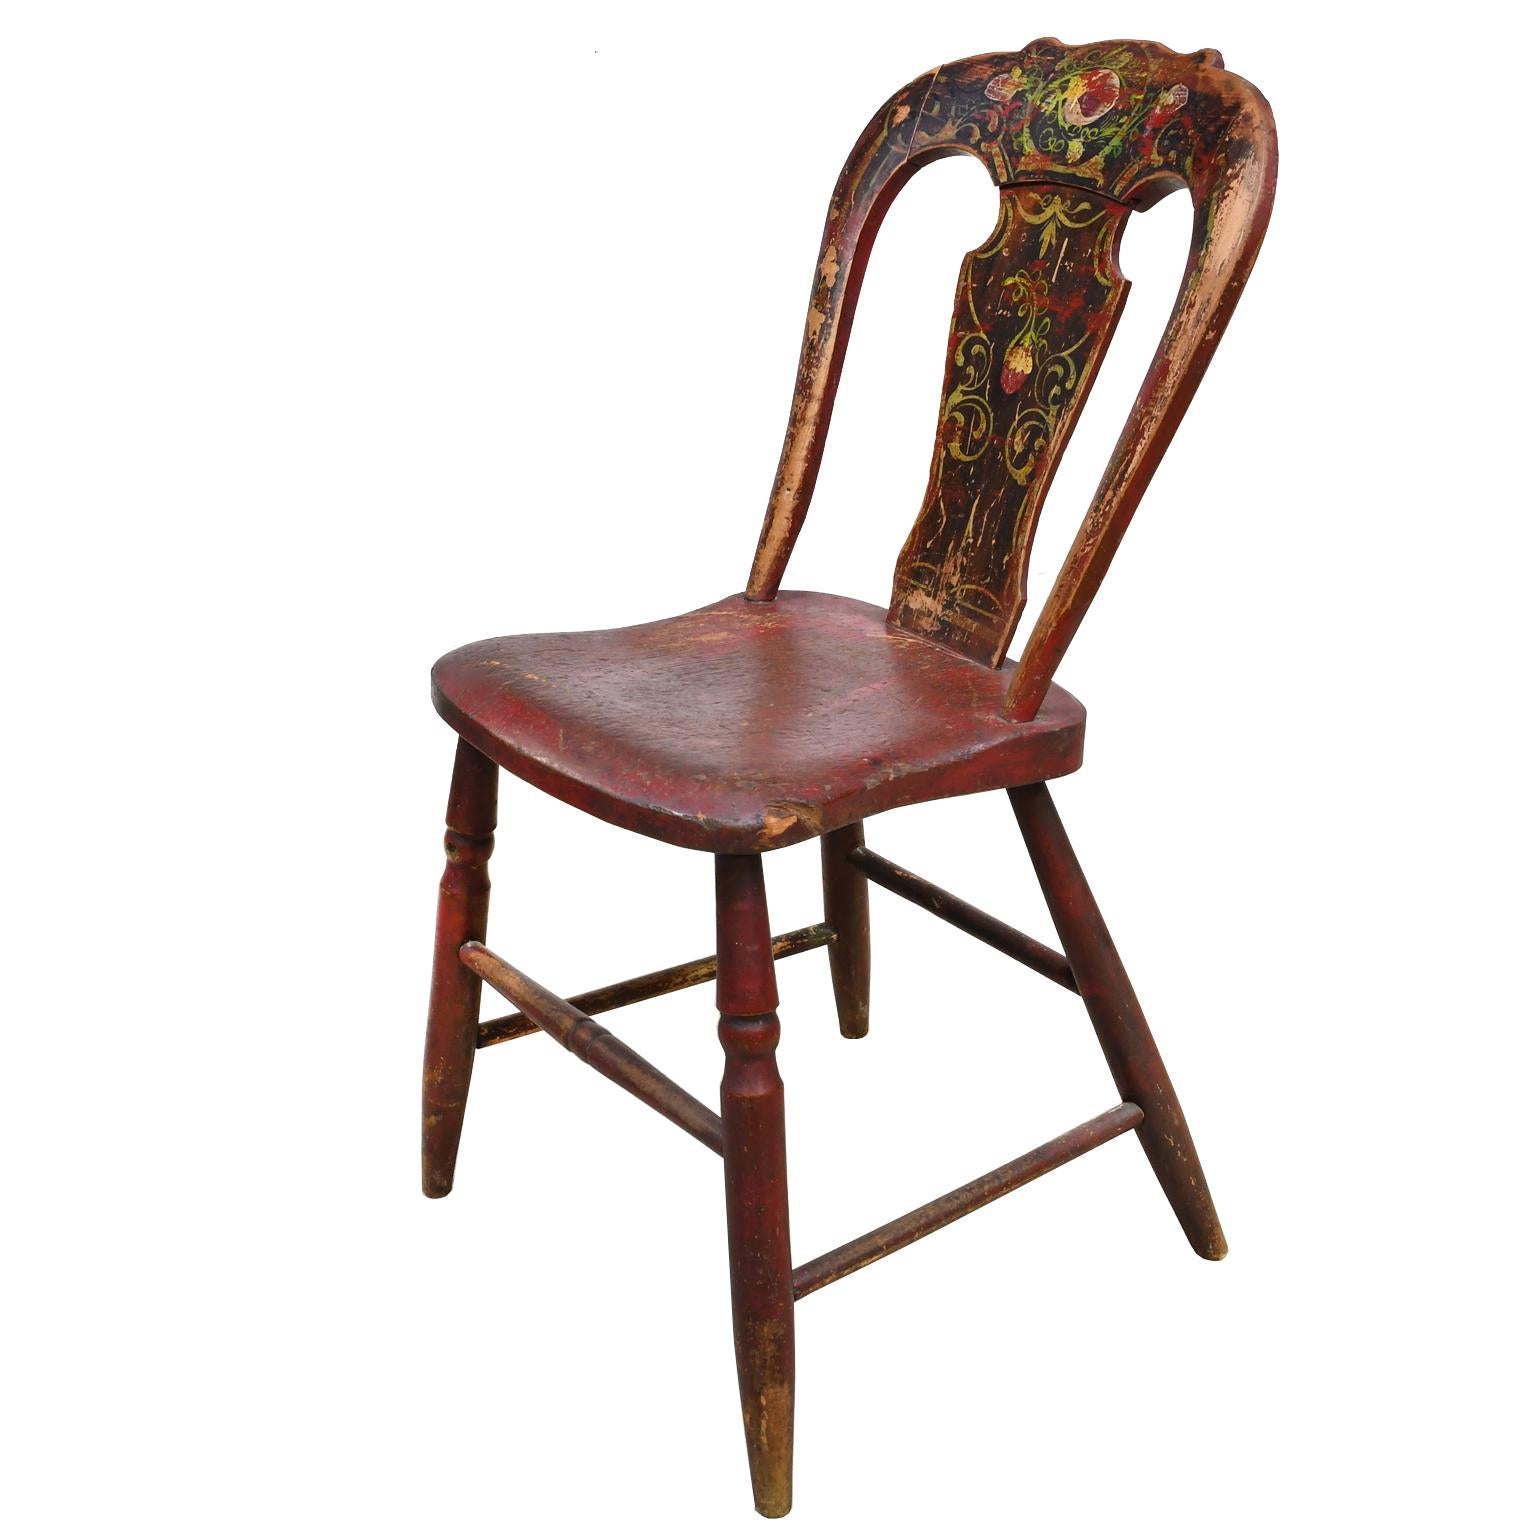 Wood Set of 3 Authentic Plank Chairs with Red/Brown Paint, Pennsylvania, circa 1840